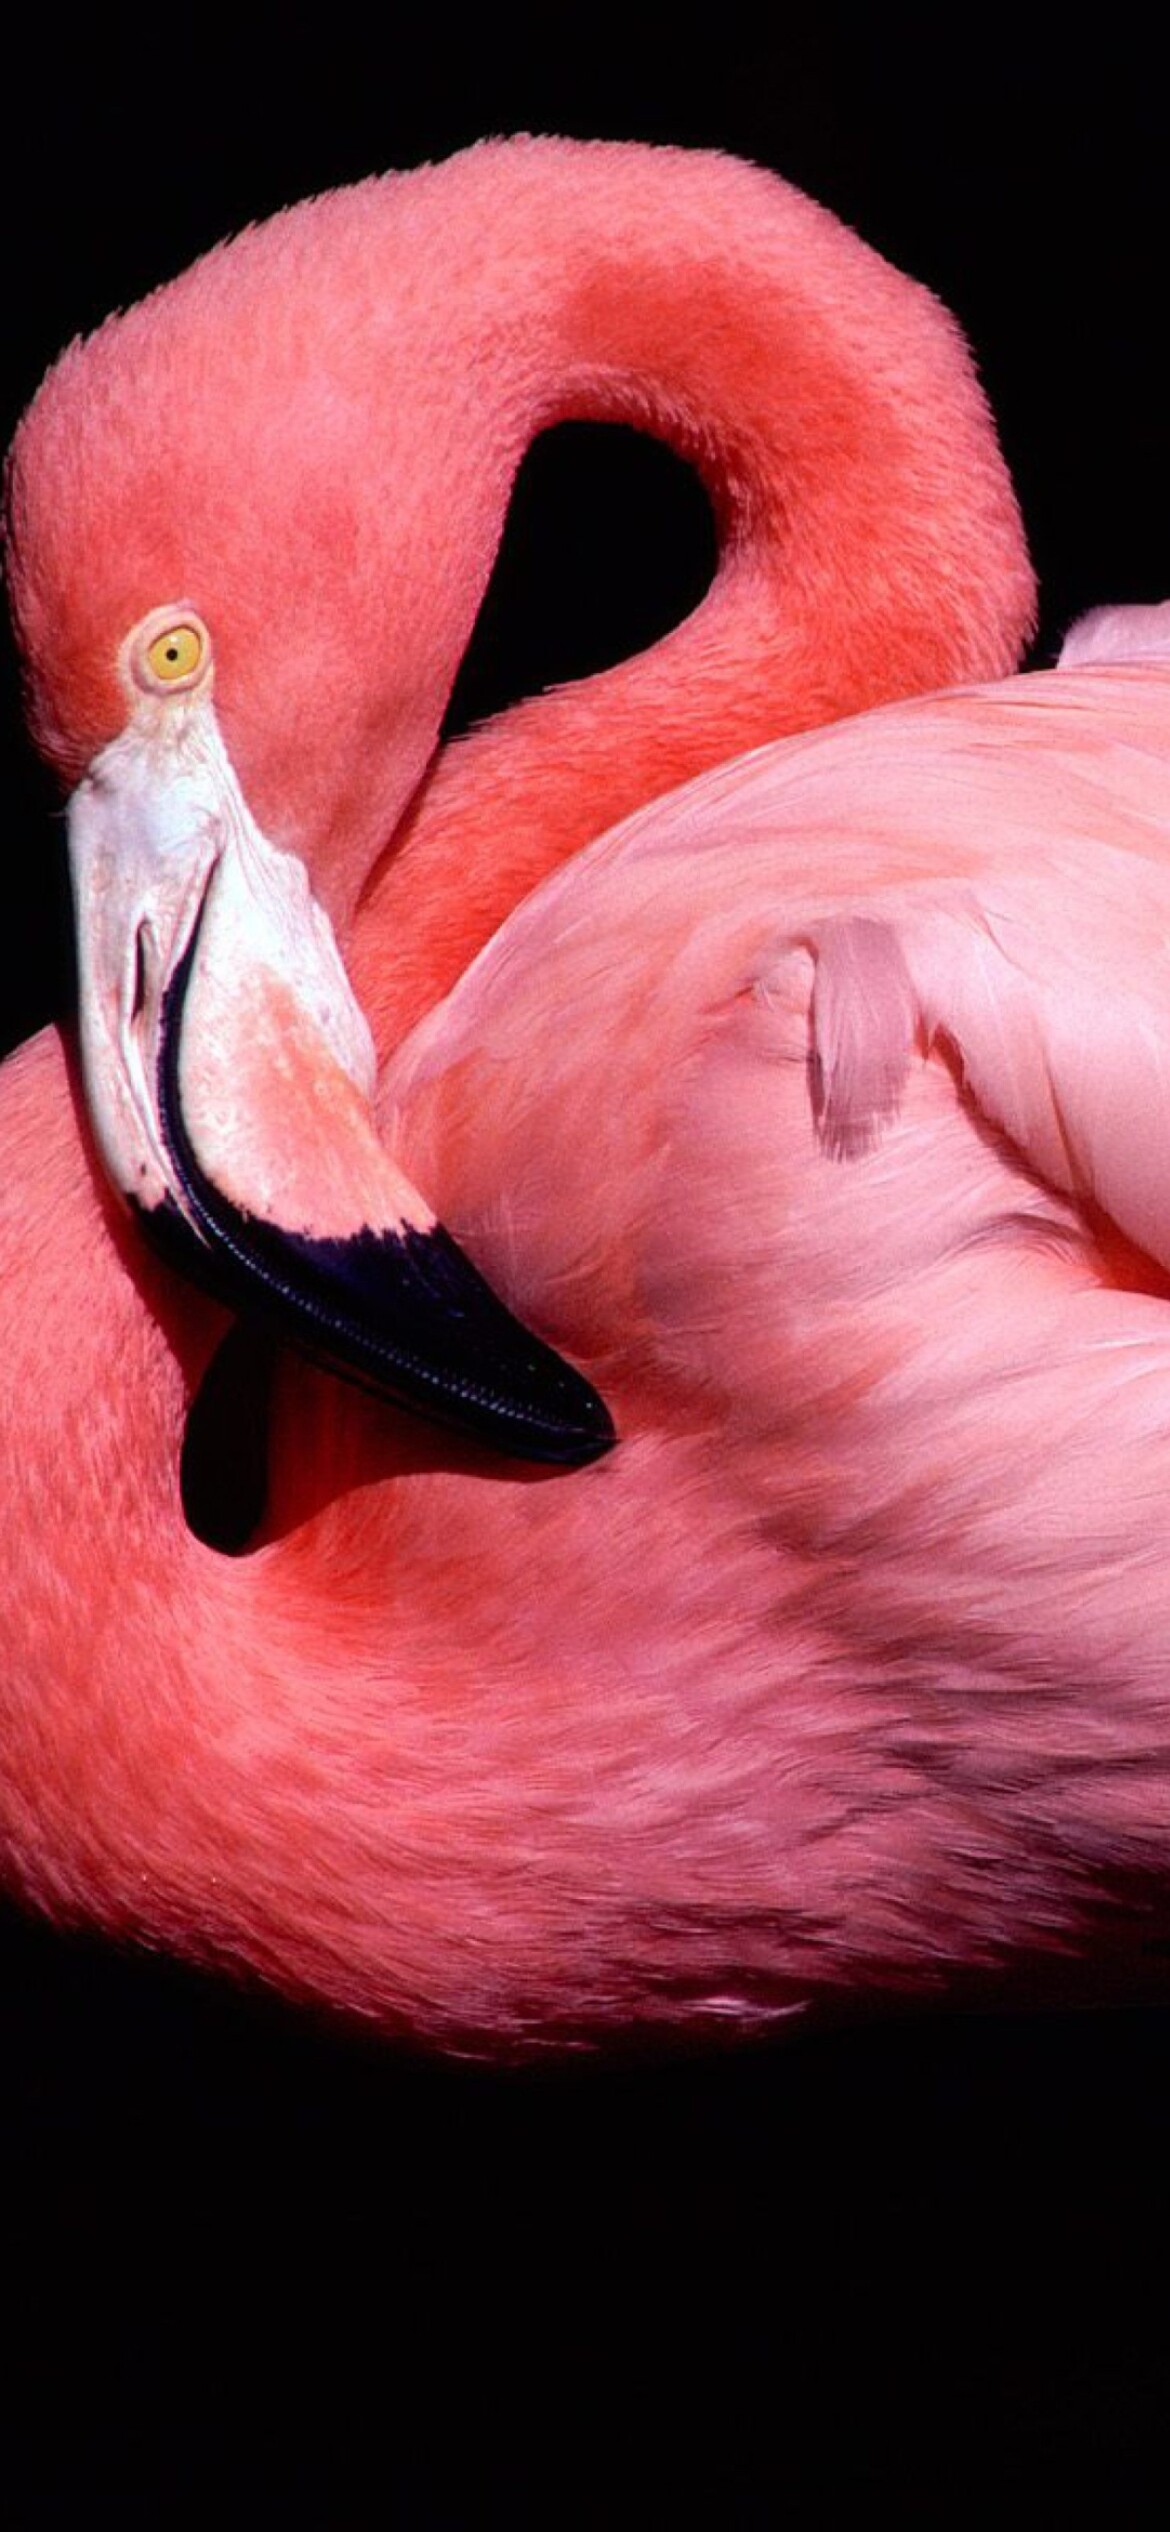 Flamingo: Known for their pink plumage and habit of sleeping while standing on one leg. 1170x2540 HD Wallpaper.